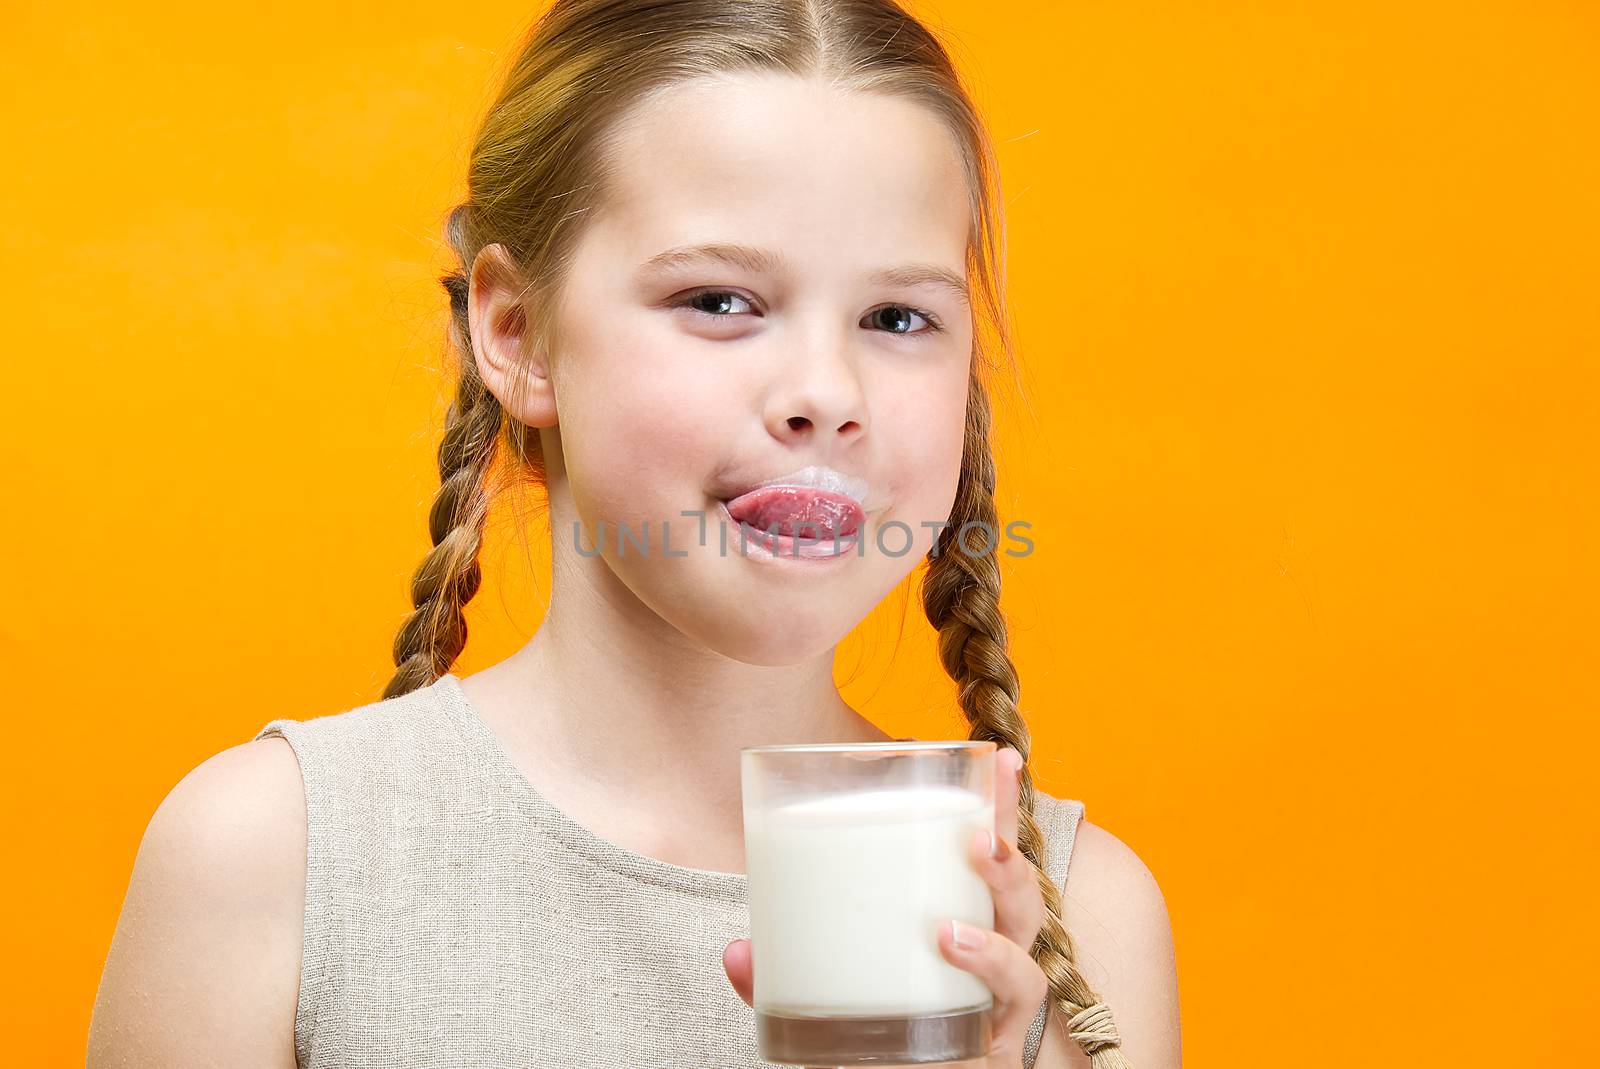 girl with pigtails and milk mustache drinks milk on orange background. by PhotoTime